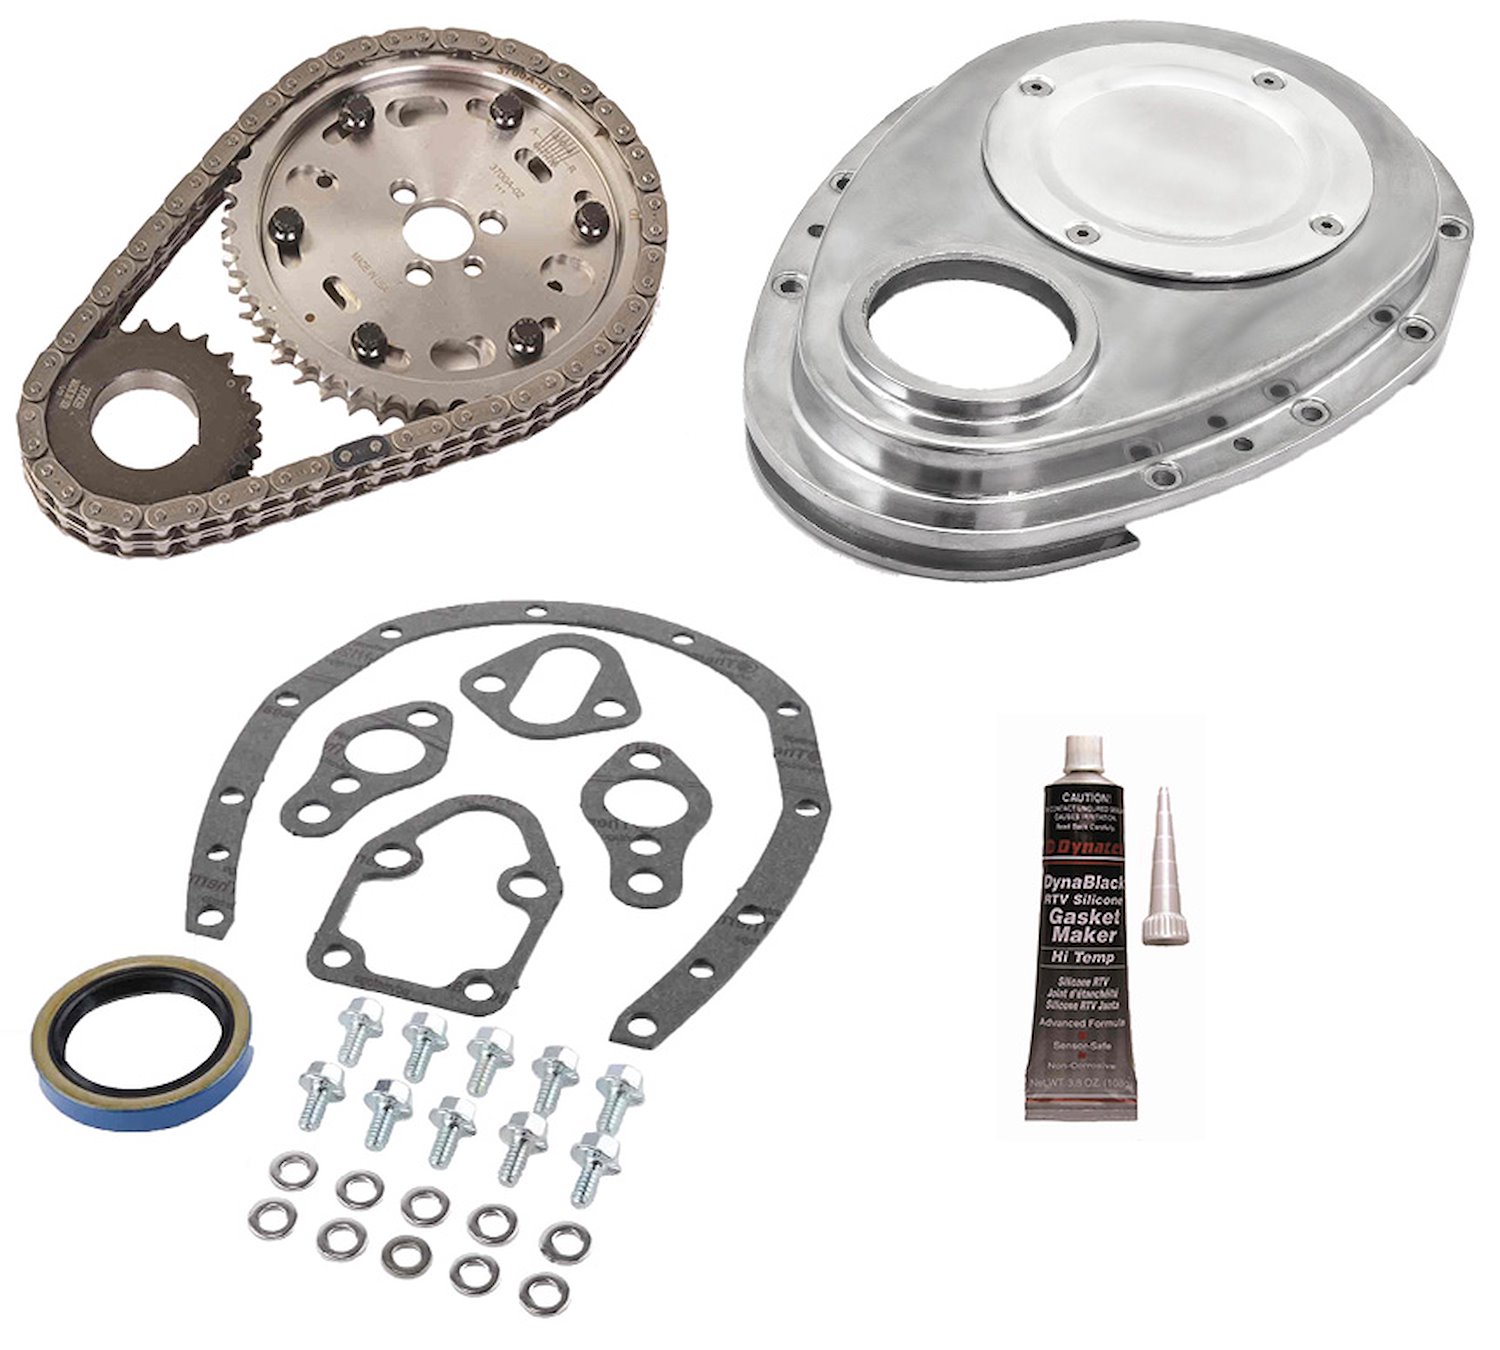 2-Piece Aluminum Timing Cover Kit for Small Block Chevy 350